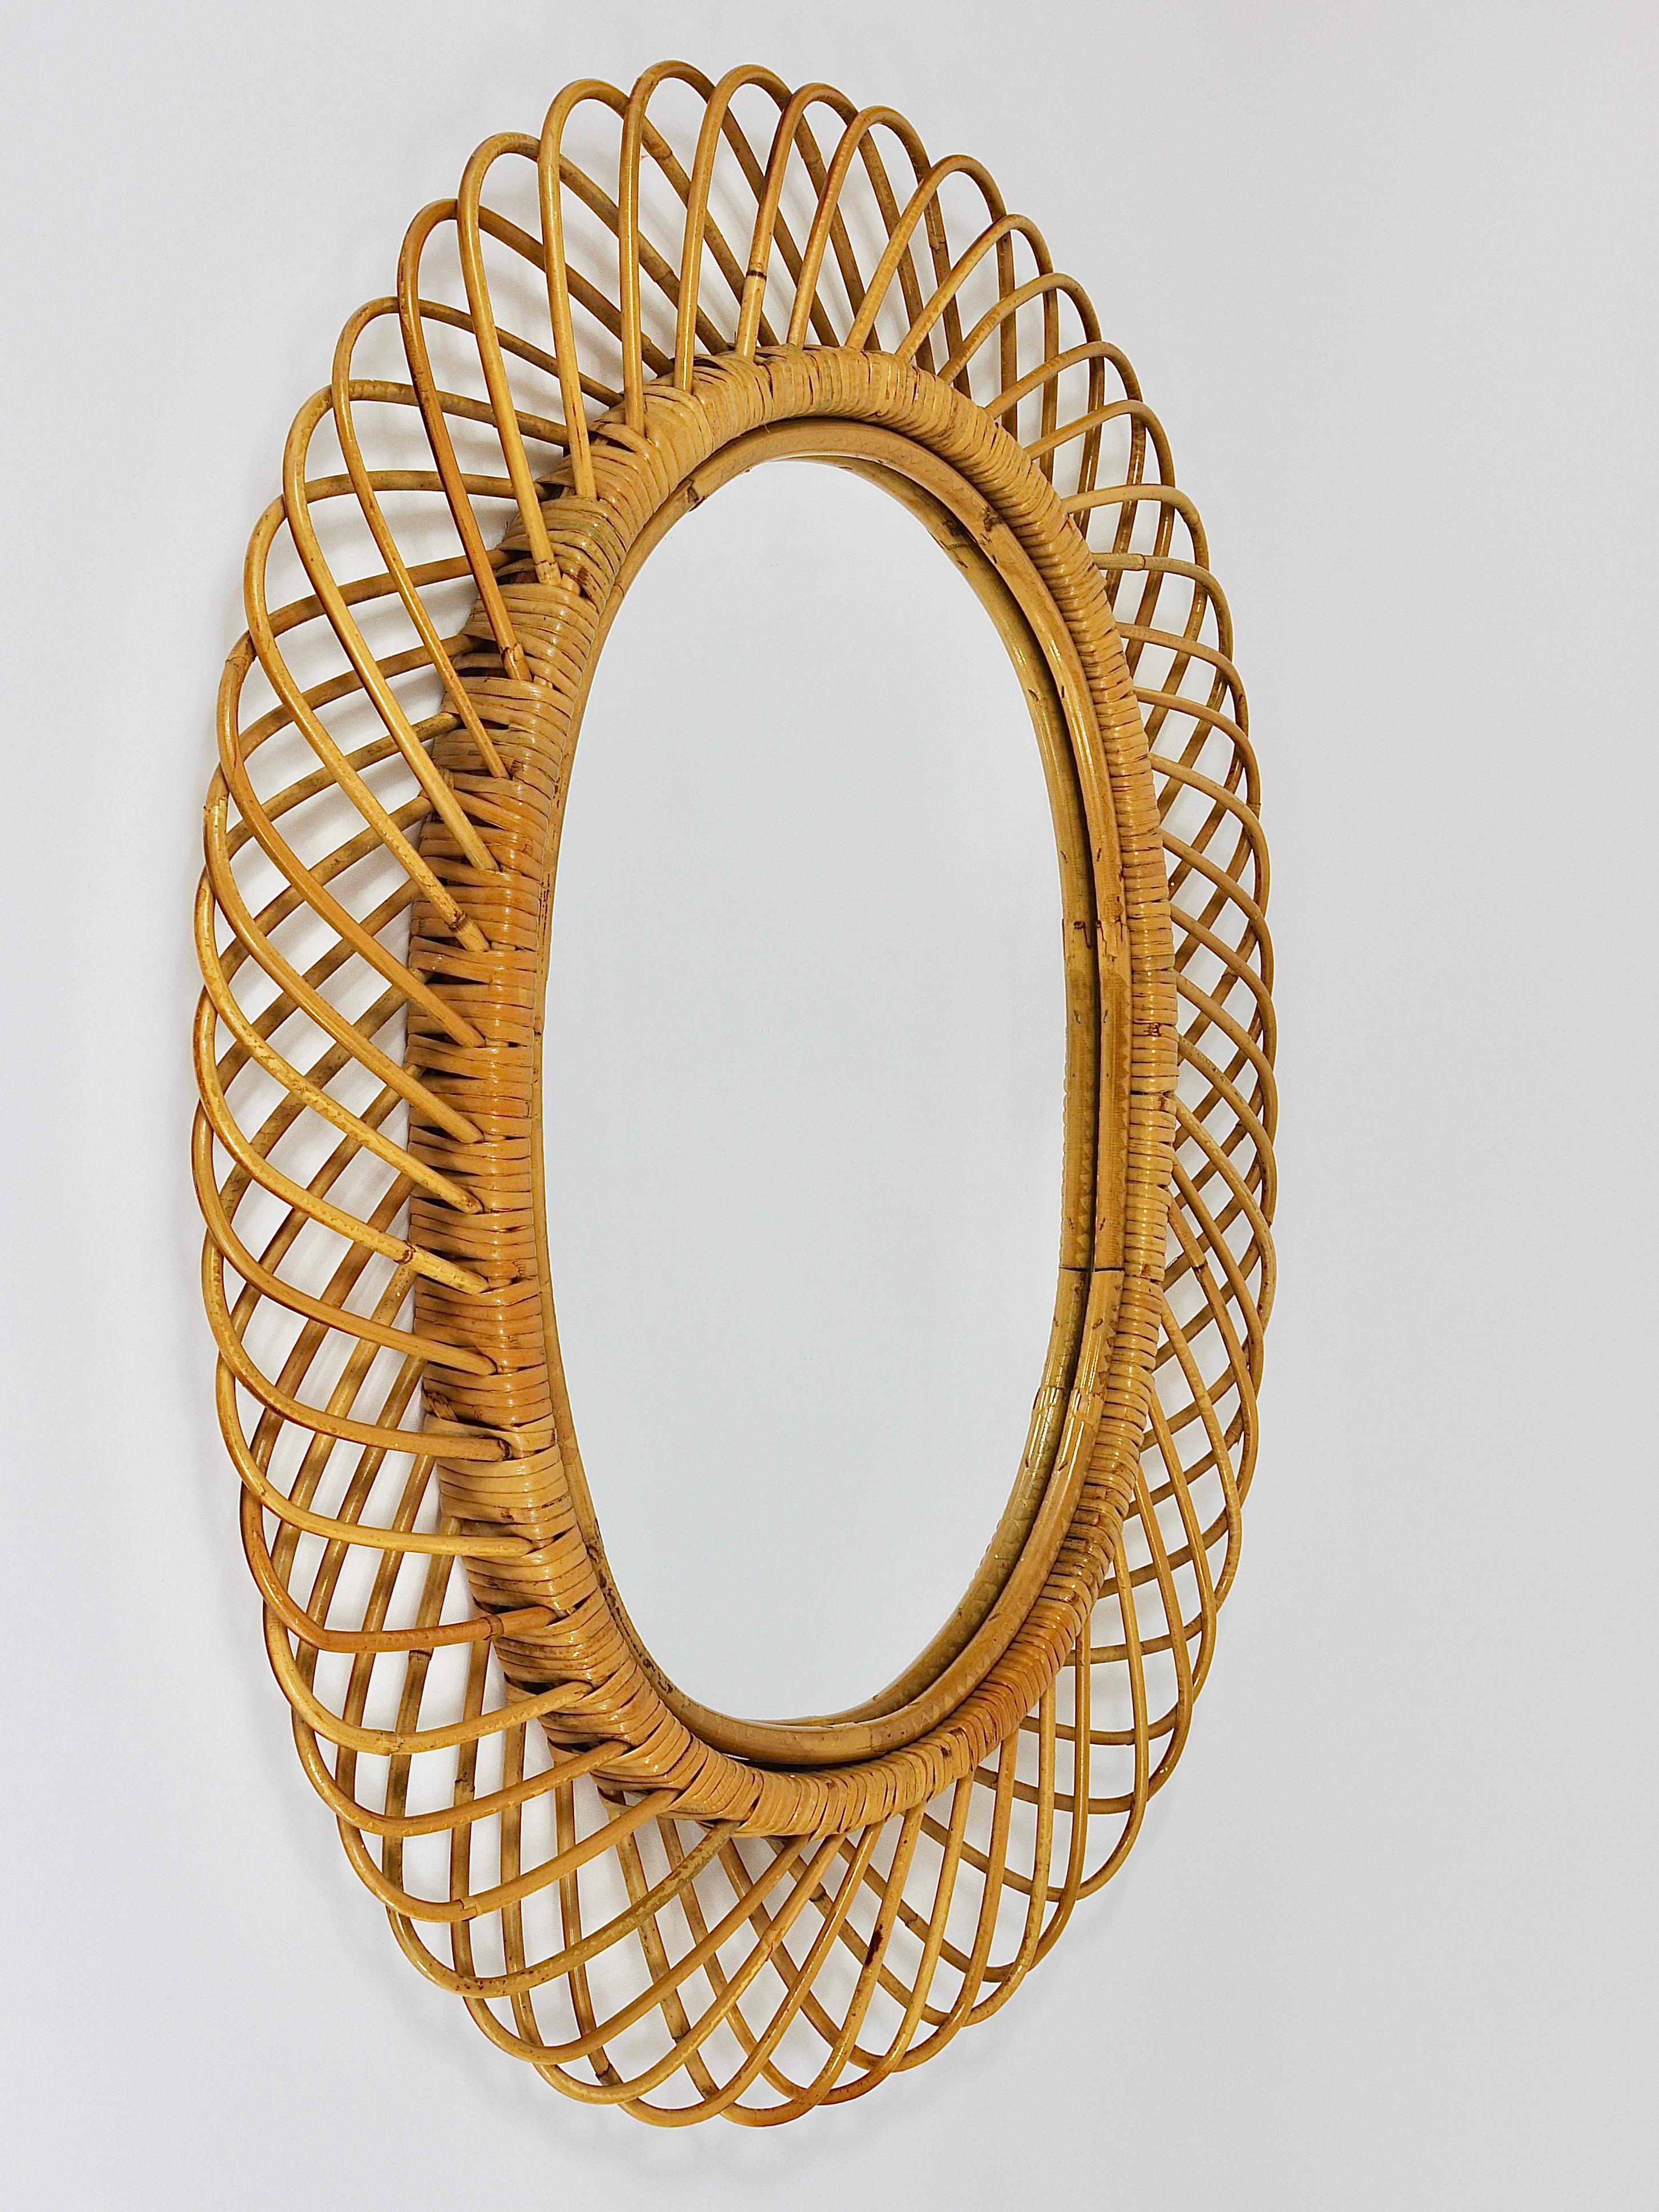 Huge Franco Albini Oval Midcentury Rattan Bamboo Sunburst Wall Mirror, 1950s In Good Condition For Sale In Vienna, AT